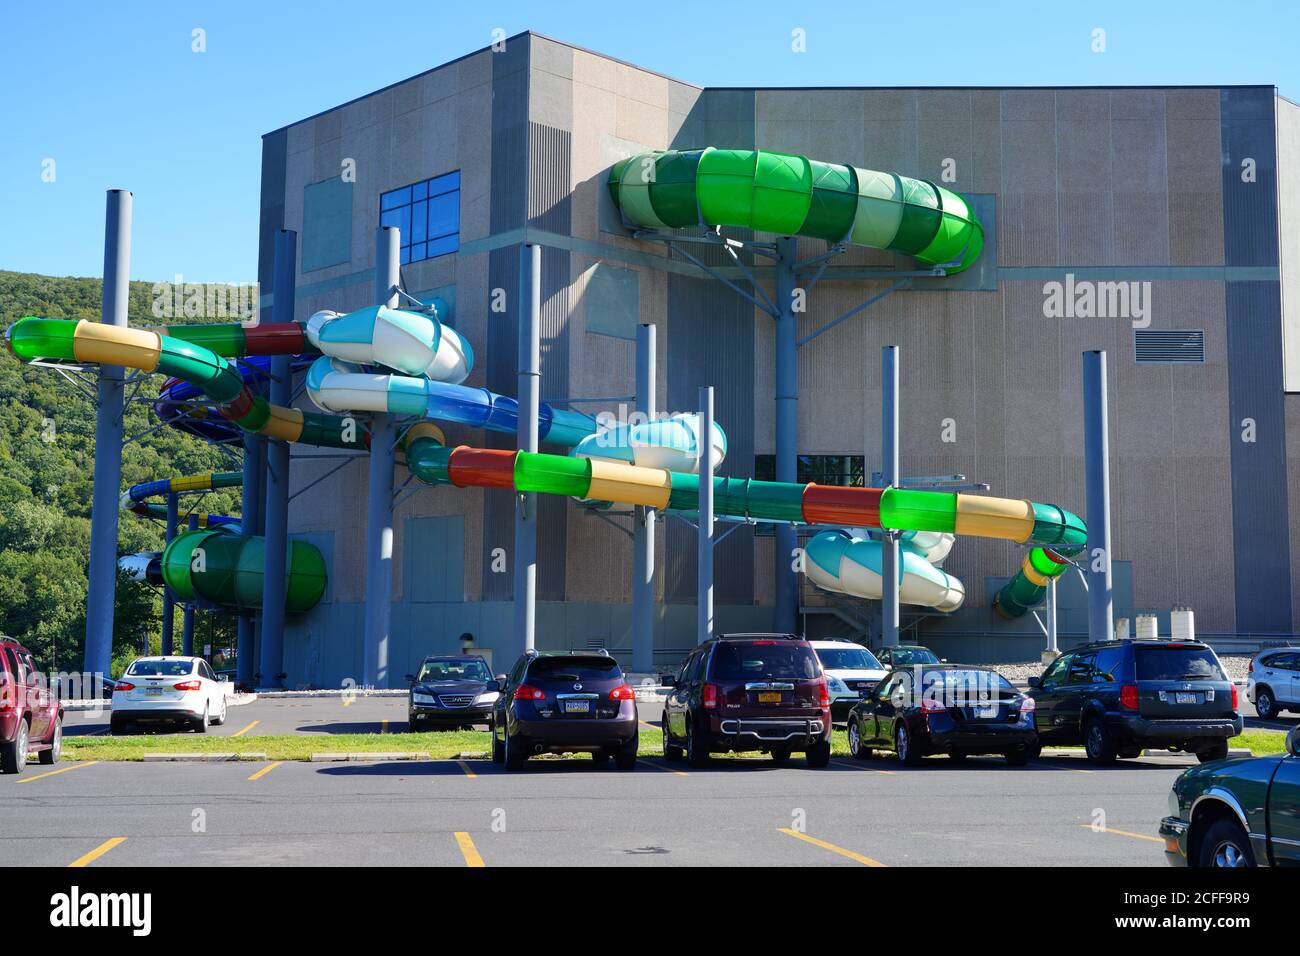 TANNERSVILLE, PA -30 AUG 2020- View of the Aquatopia indoor waterpark at the Camelback Mountain Resort, a large ski resort in the Poconos mountains in Stock Photo